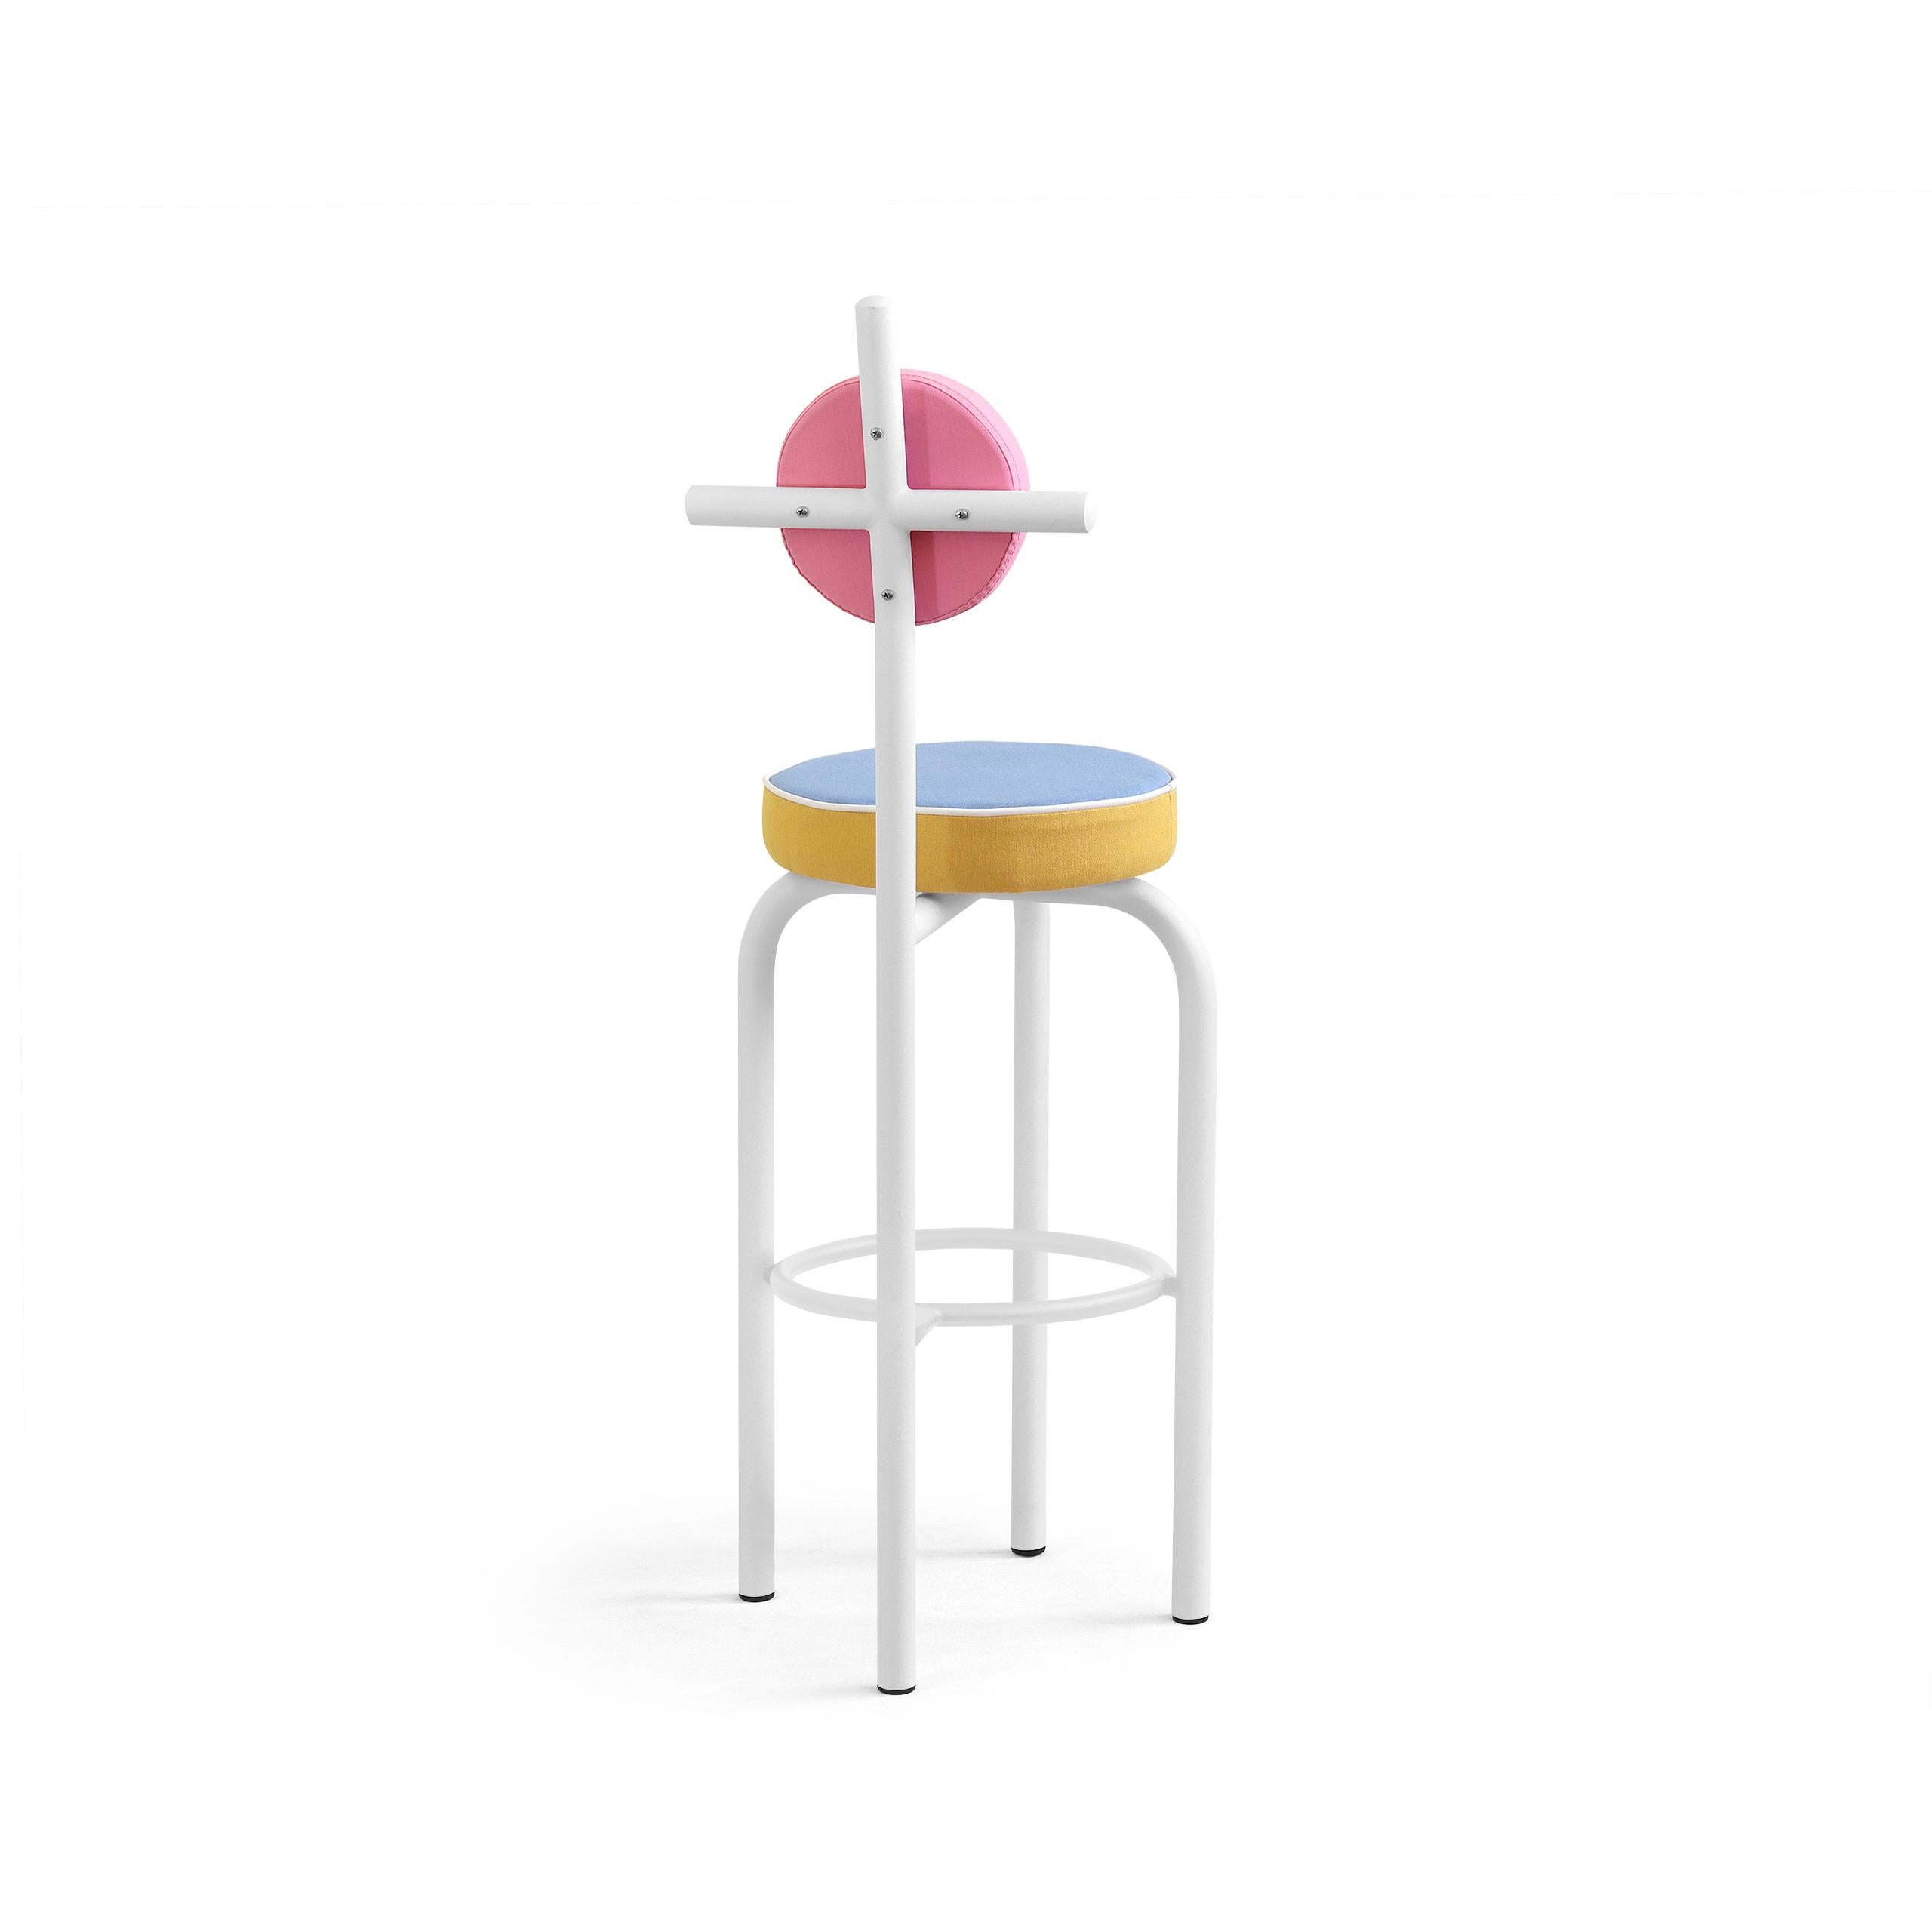 PK19 Bar Stool, Embroidered Upholstery & Carbon Steel Structure by Paulo Kobylka In New Condition For Sale In Londrina, Paraná